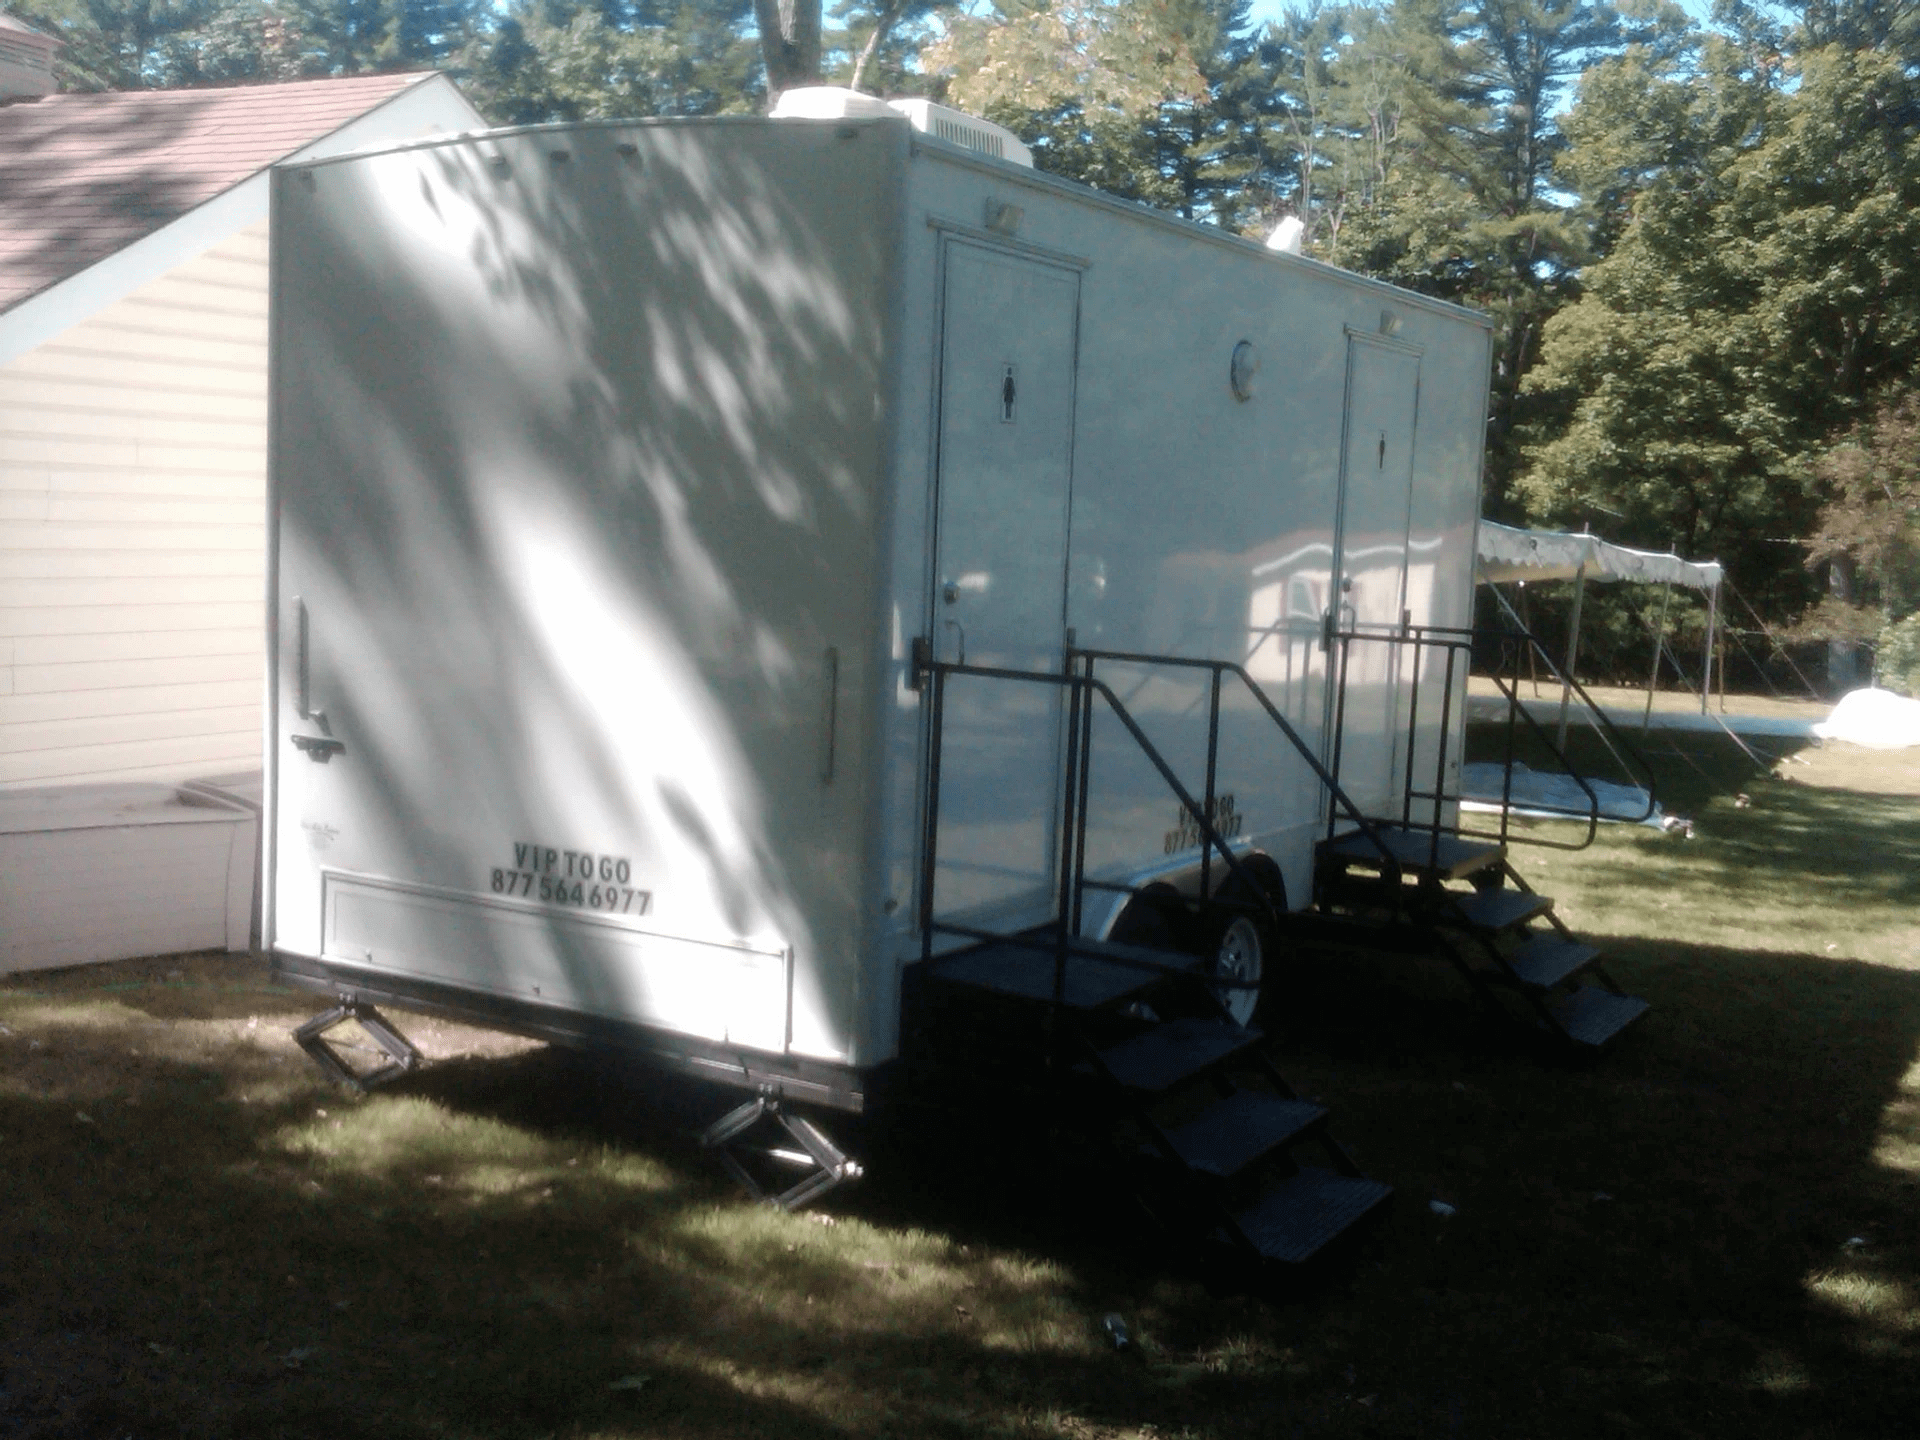 Portable shower trailer at an outdoor location